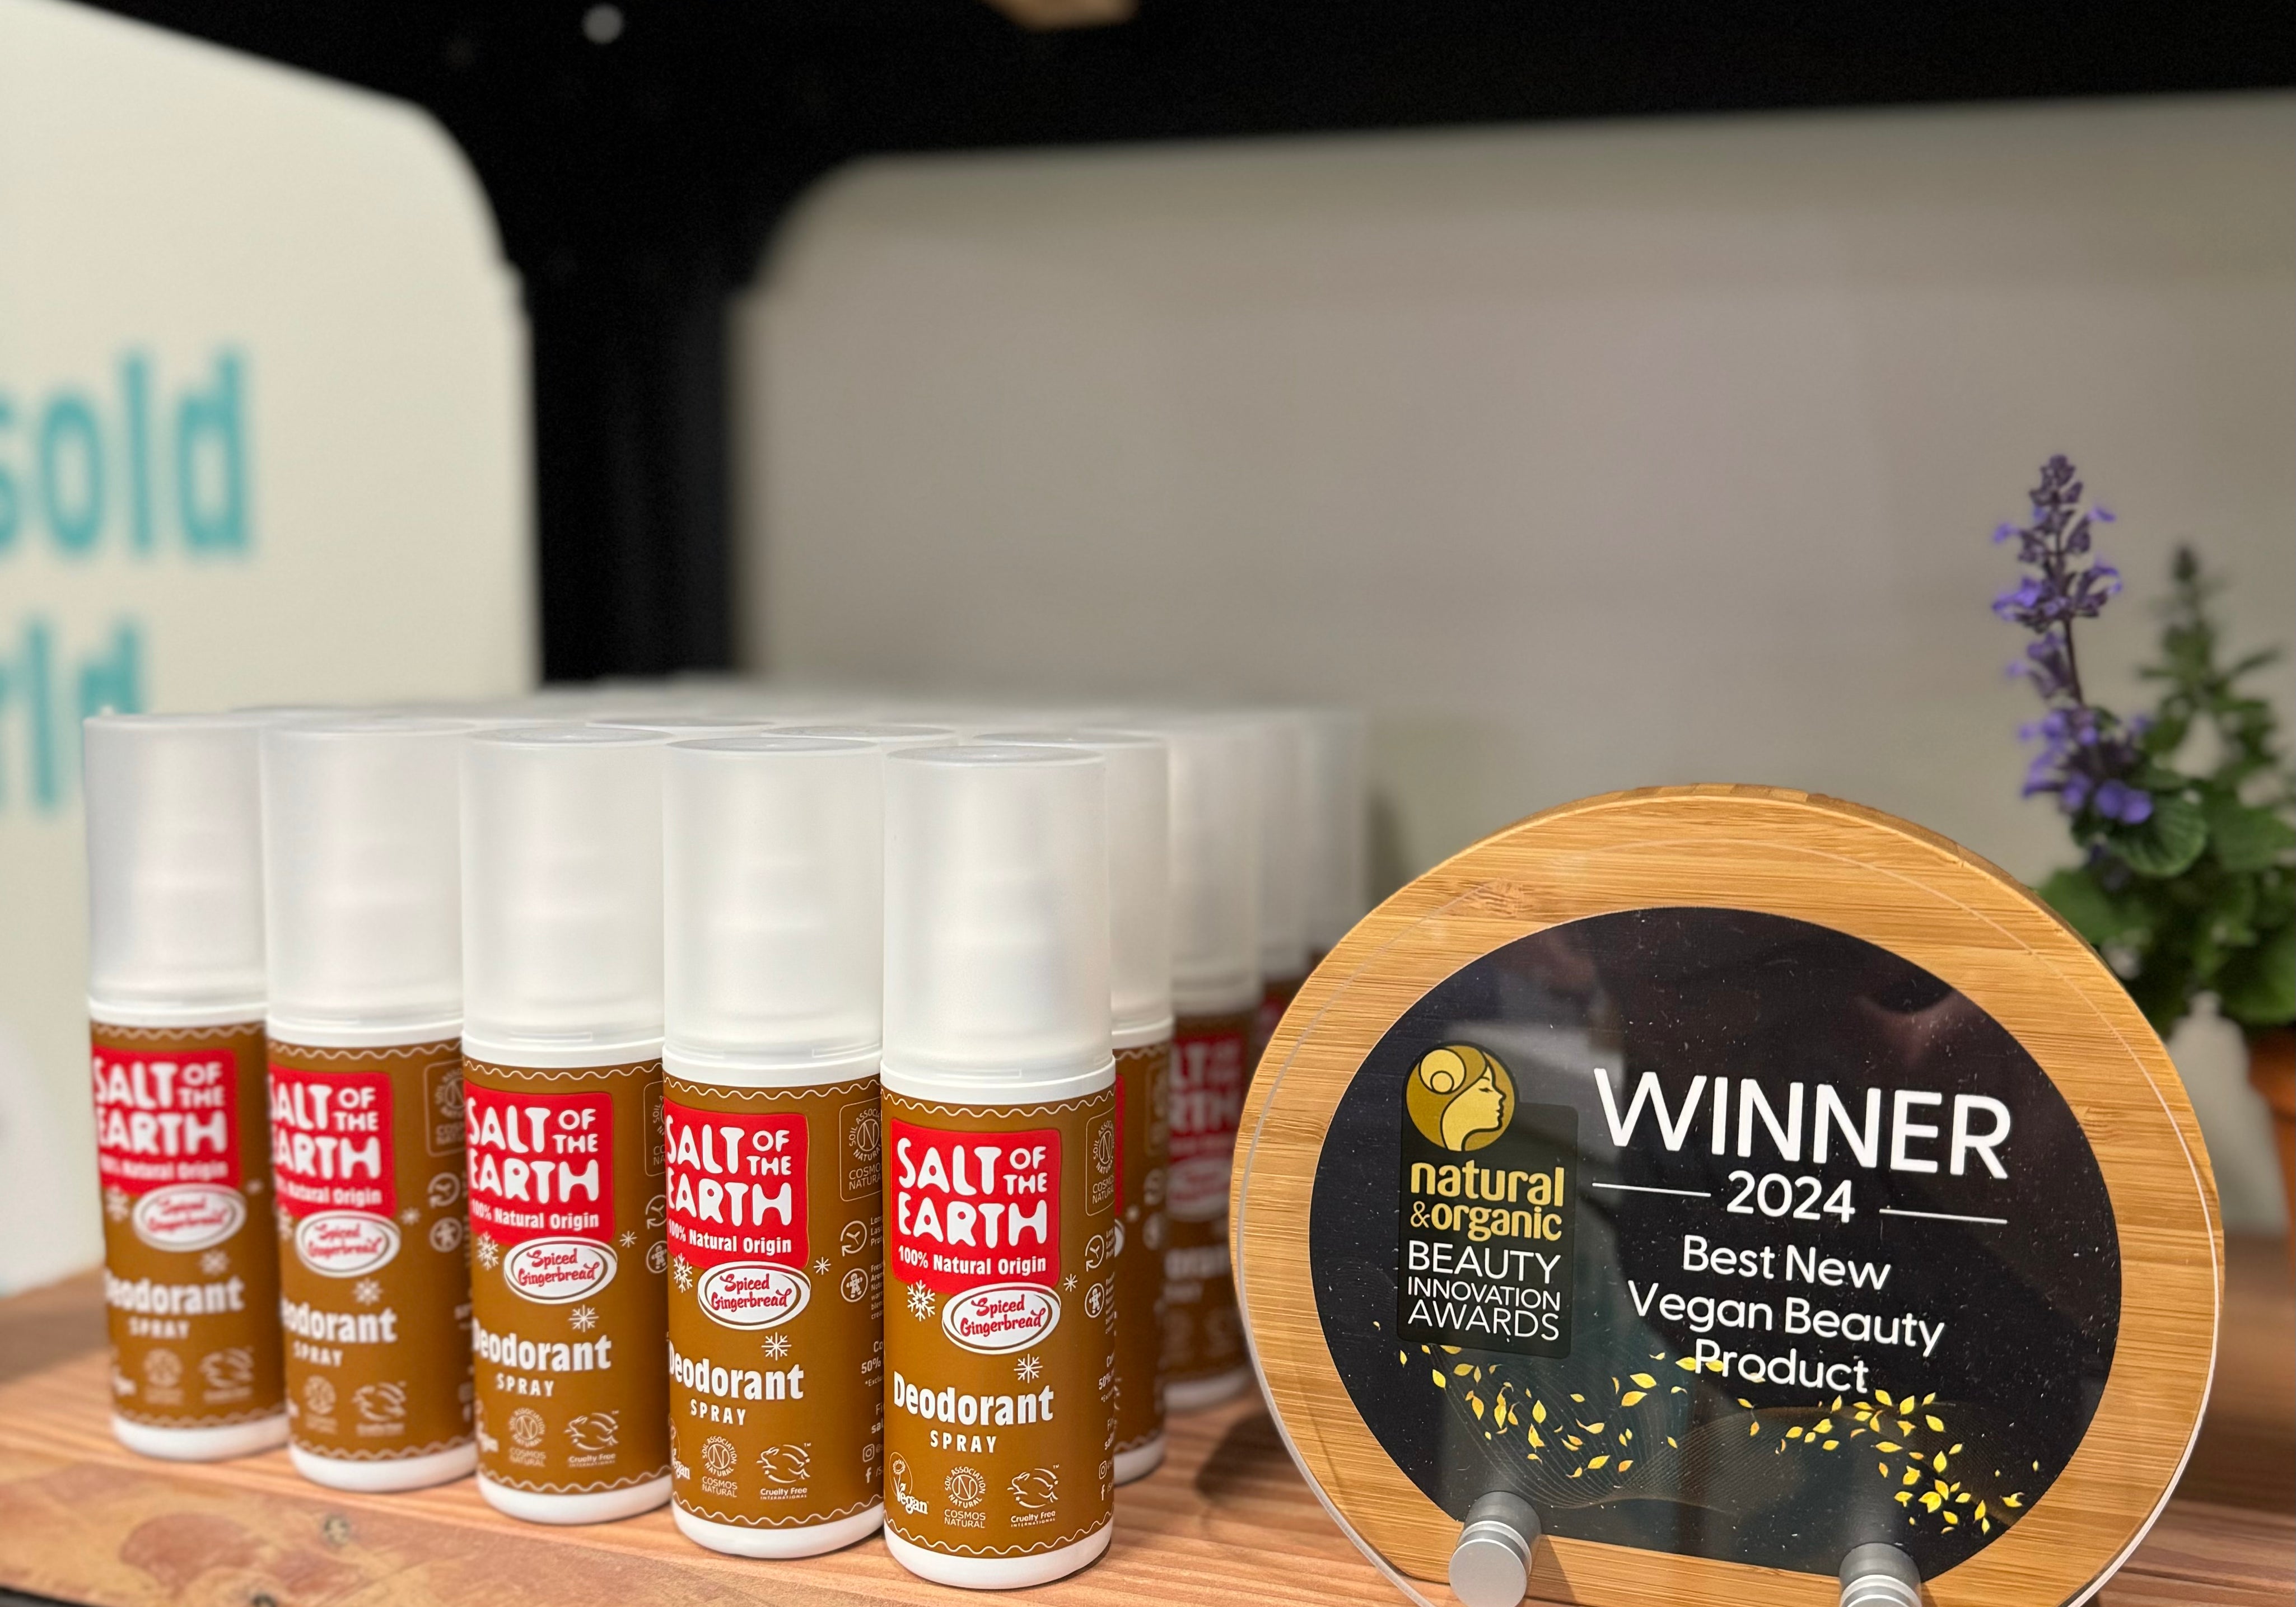 Spiced Gingerbread natural deodorant spray with its award for best vegan beauty product